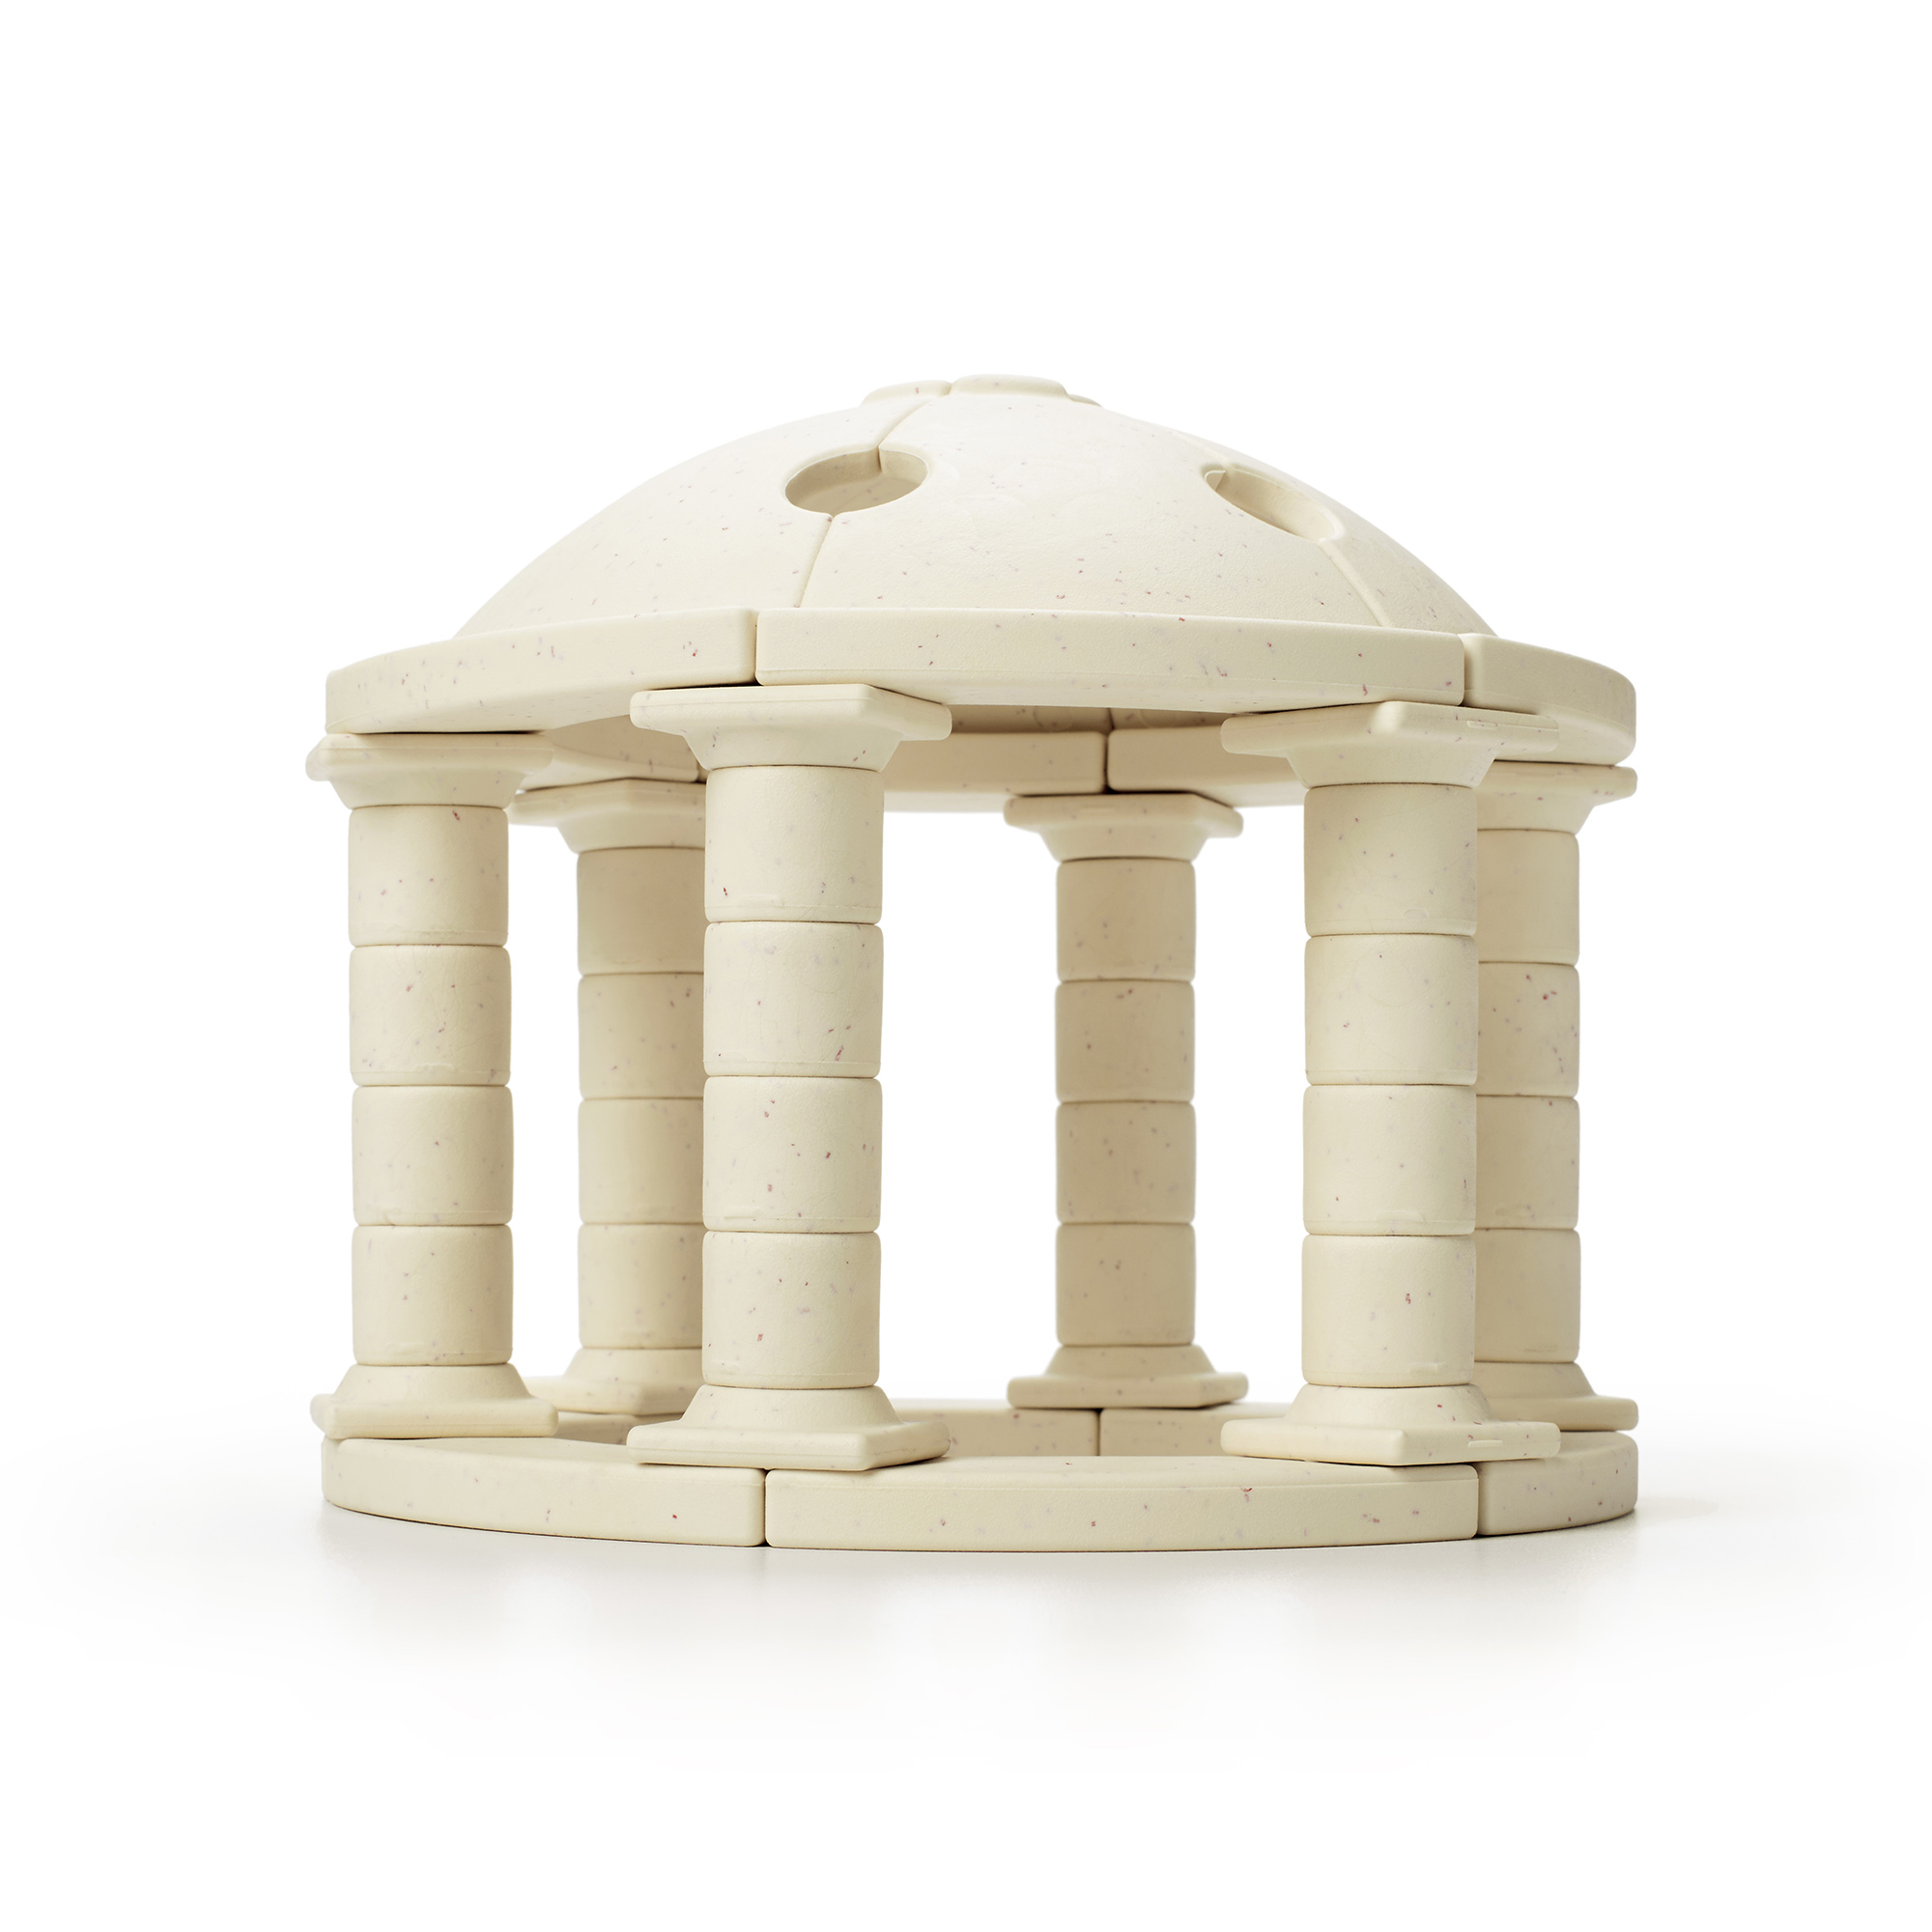 Taksa Toys Ancient Roman Arch Stem Toys Premium Educational Stackable  Building Blocks, for Kids Ages 7 8 9 10+ Years Old, Indoor Architectural  Kit